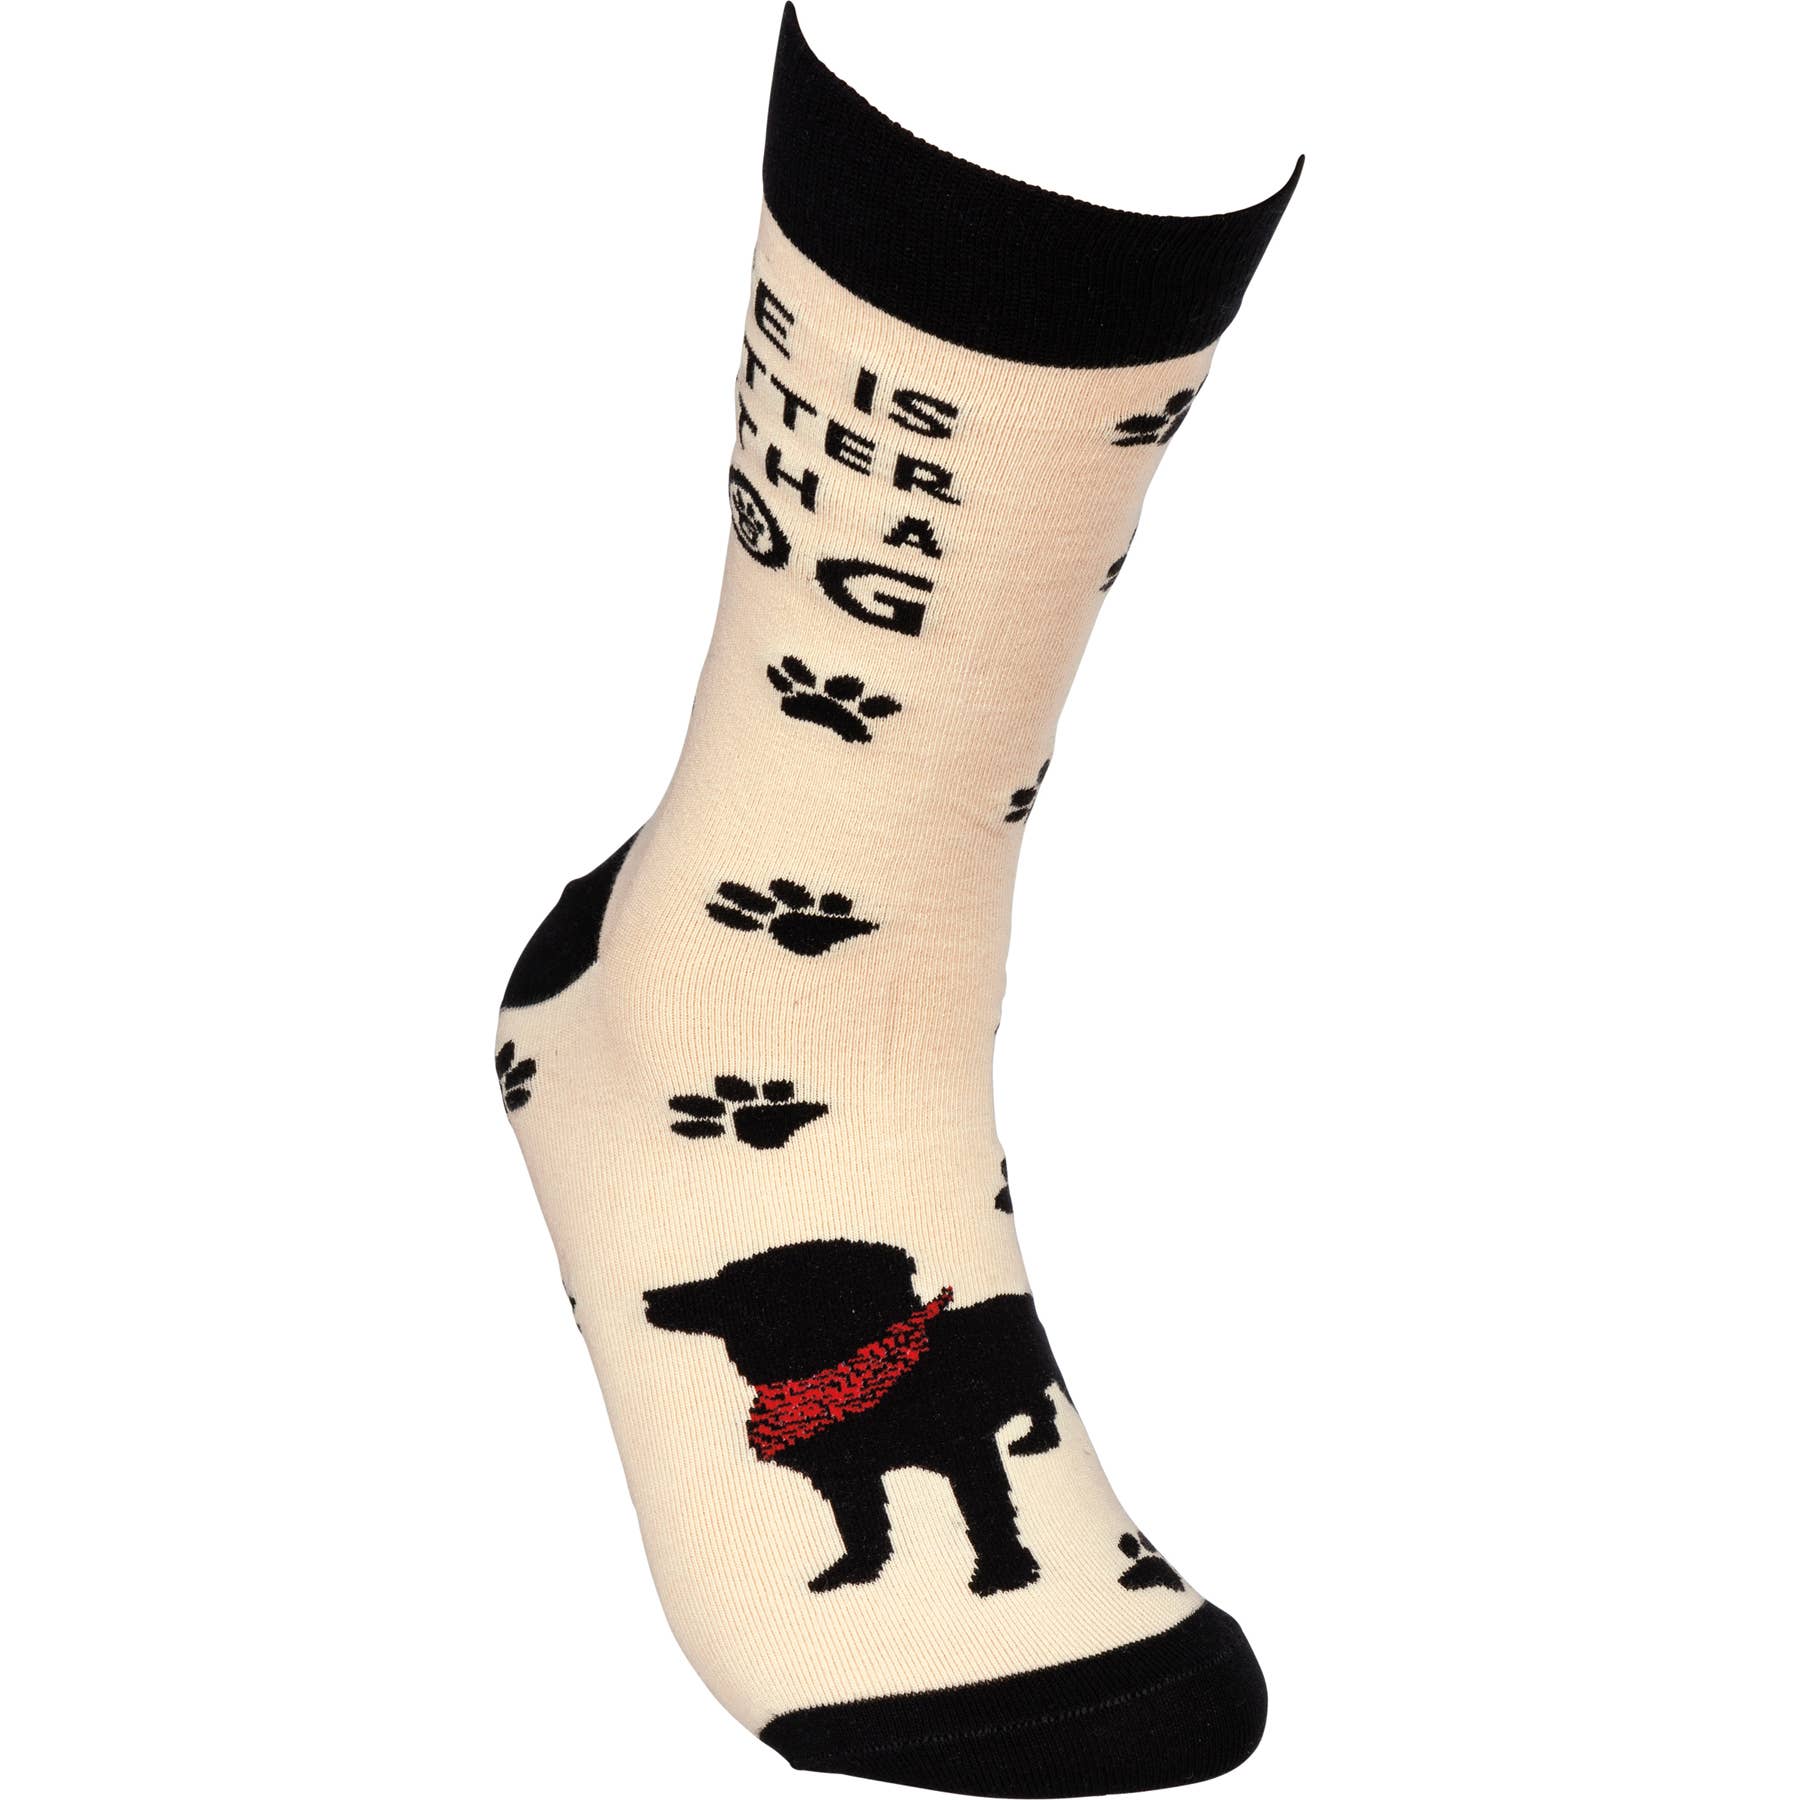 Primitives by Kathy - Life Is Better With A Dog Socks